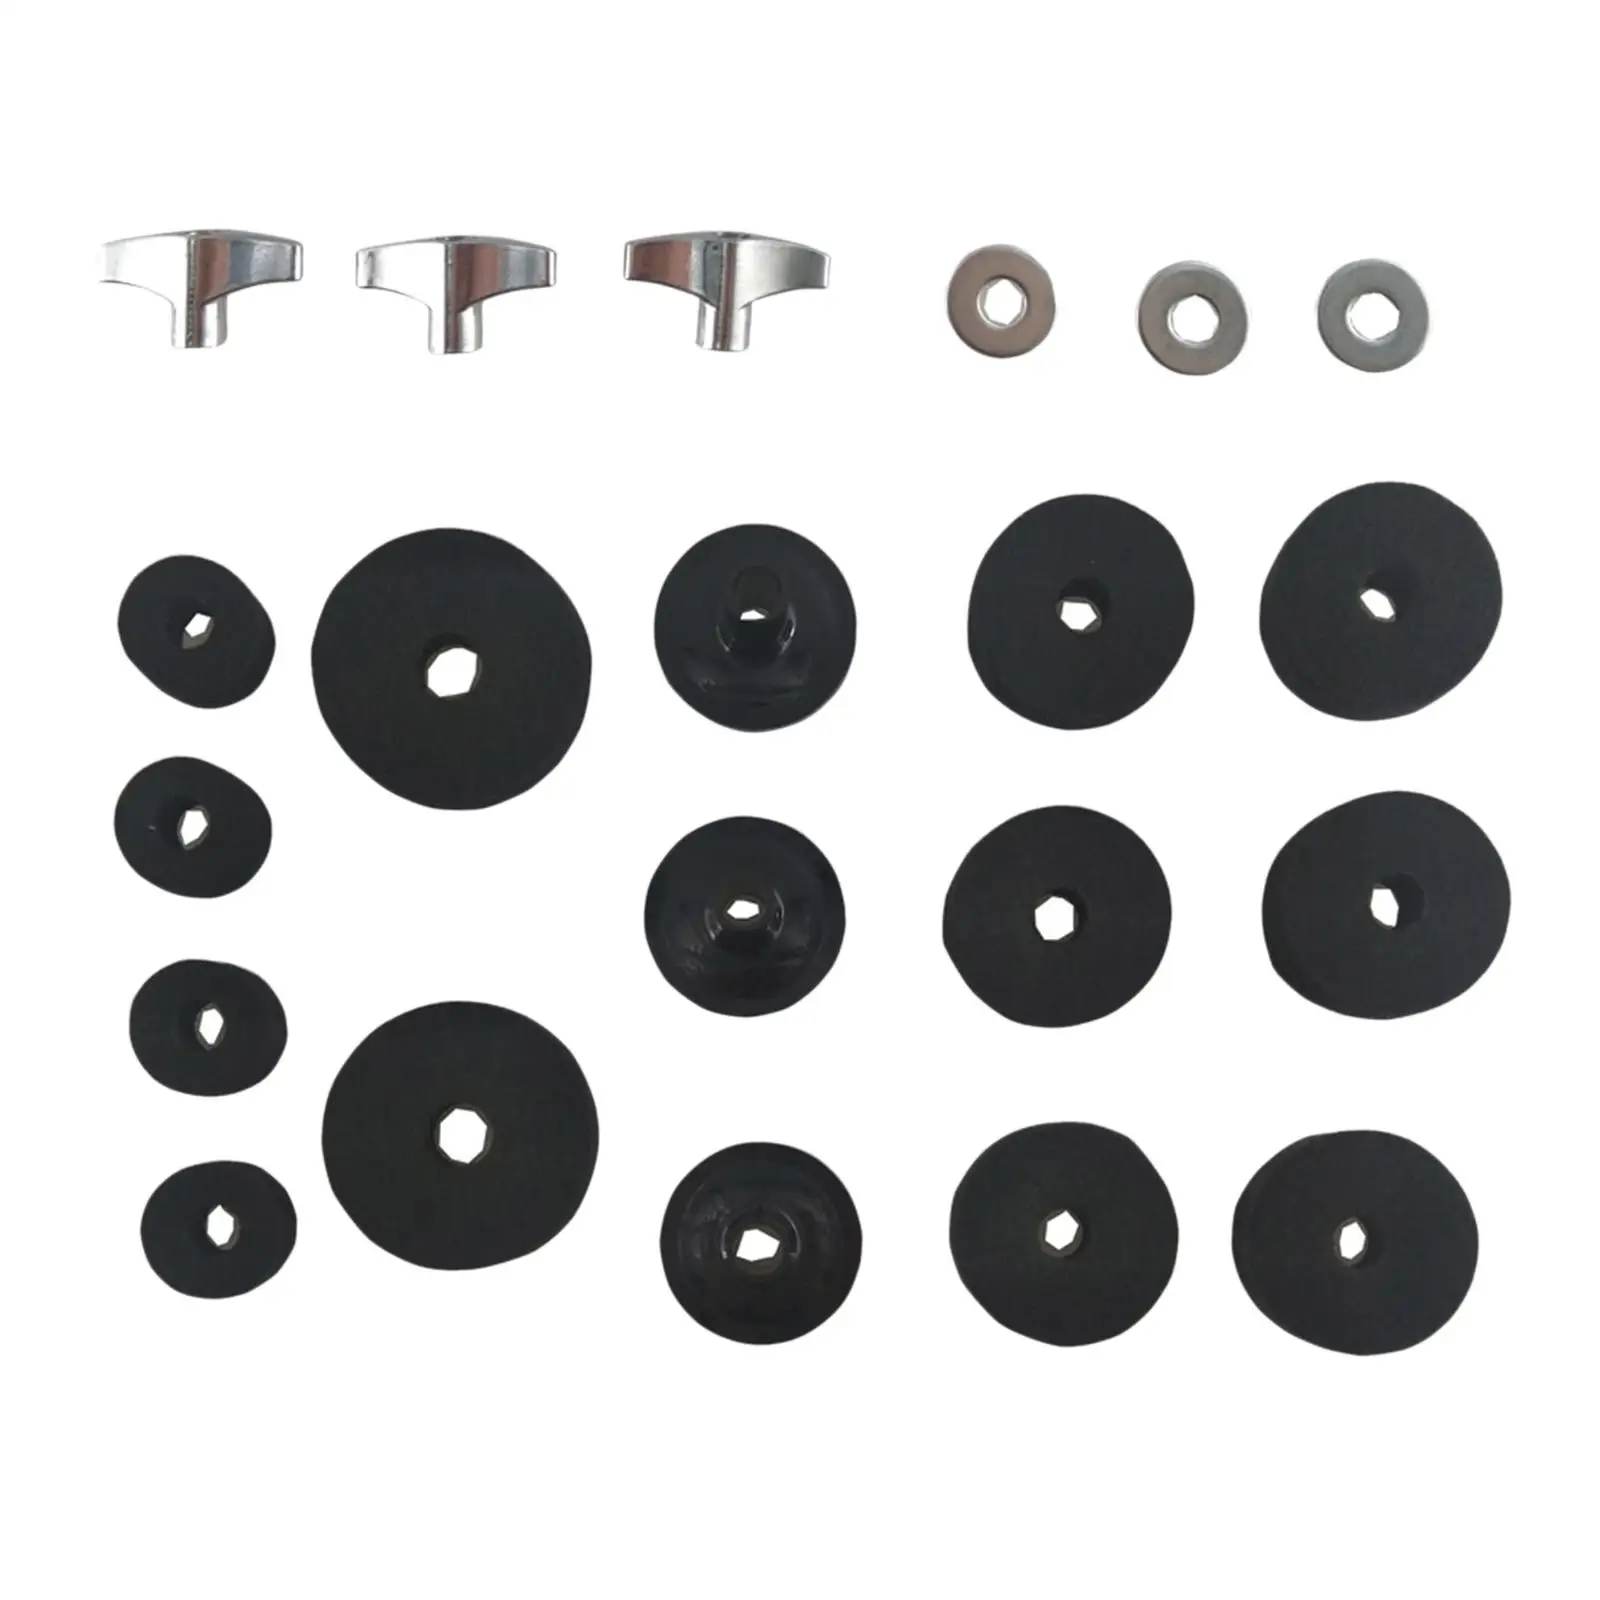 21x Drum Sets Replacement Cymbal Felts Washers Replacement Accessories Drum Replacement Parts